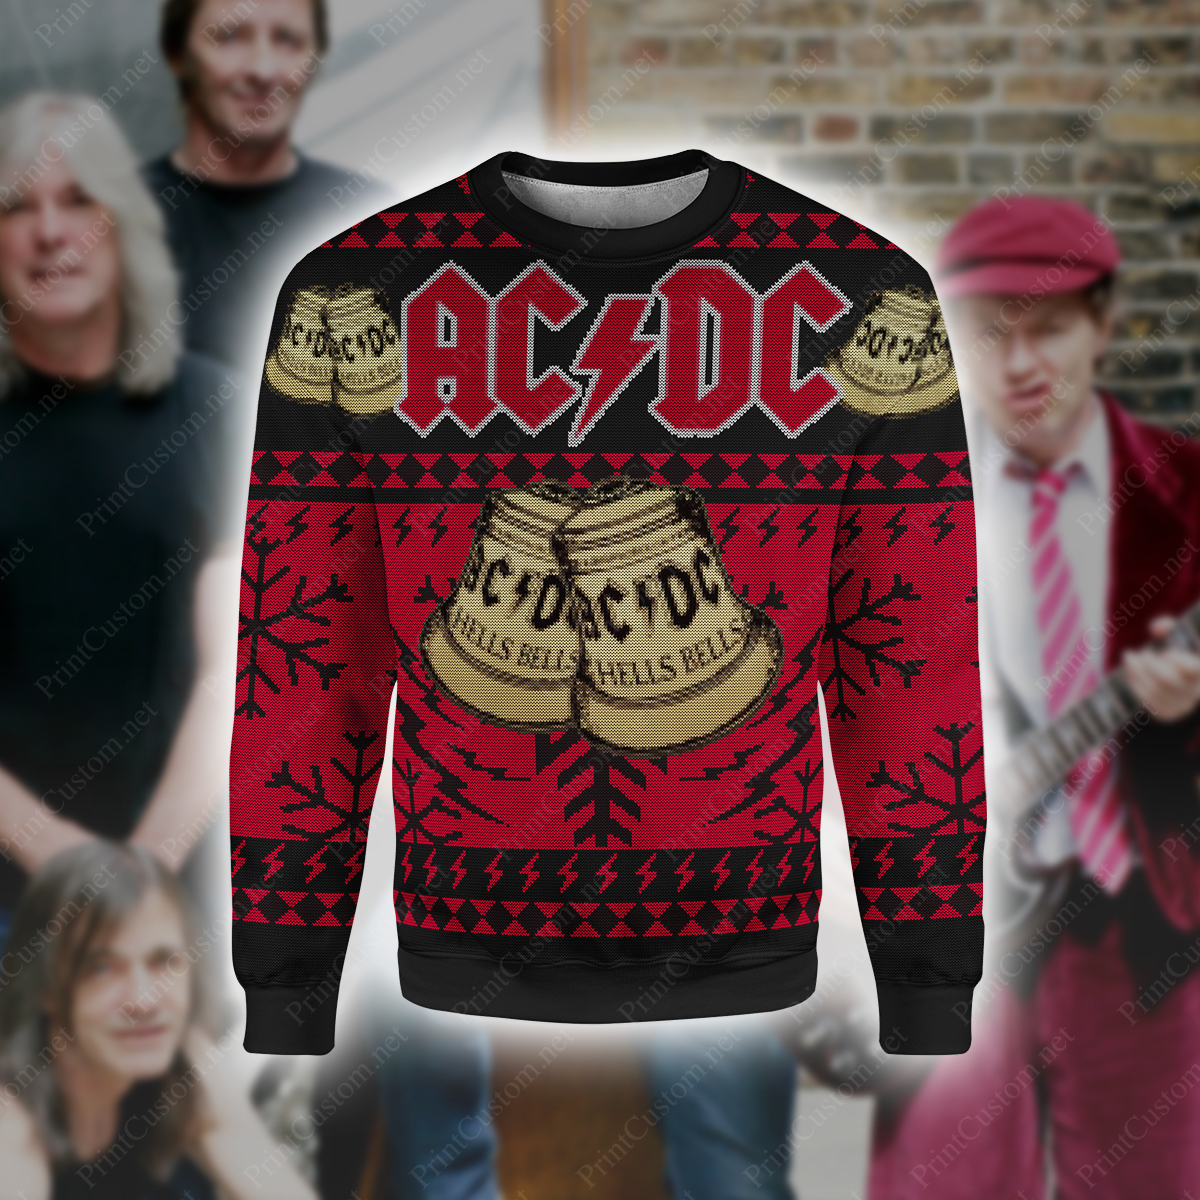 ACDC hells bells full printing ugly christmas sweater 3